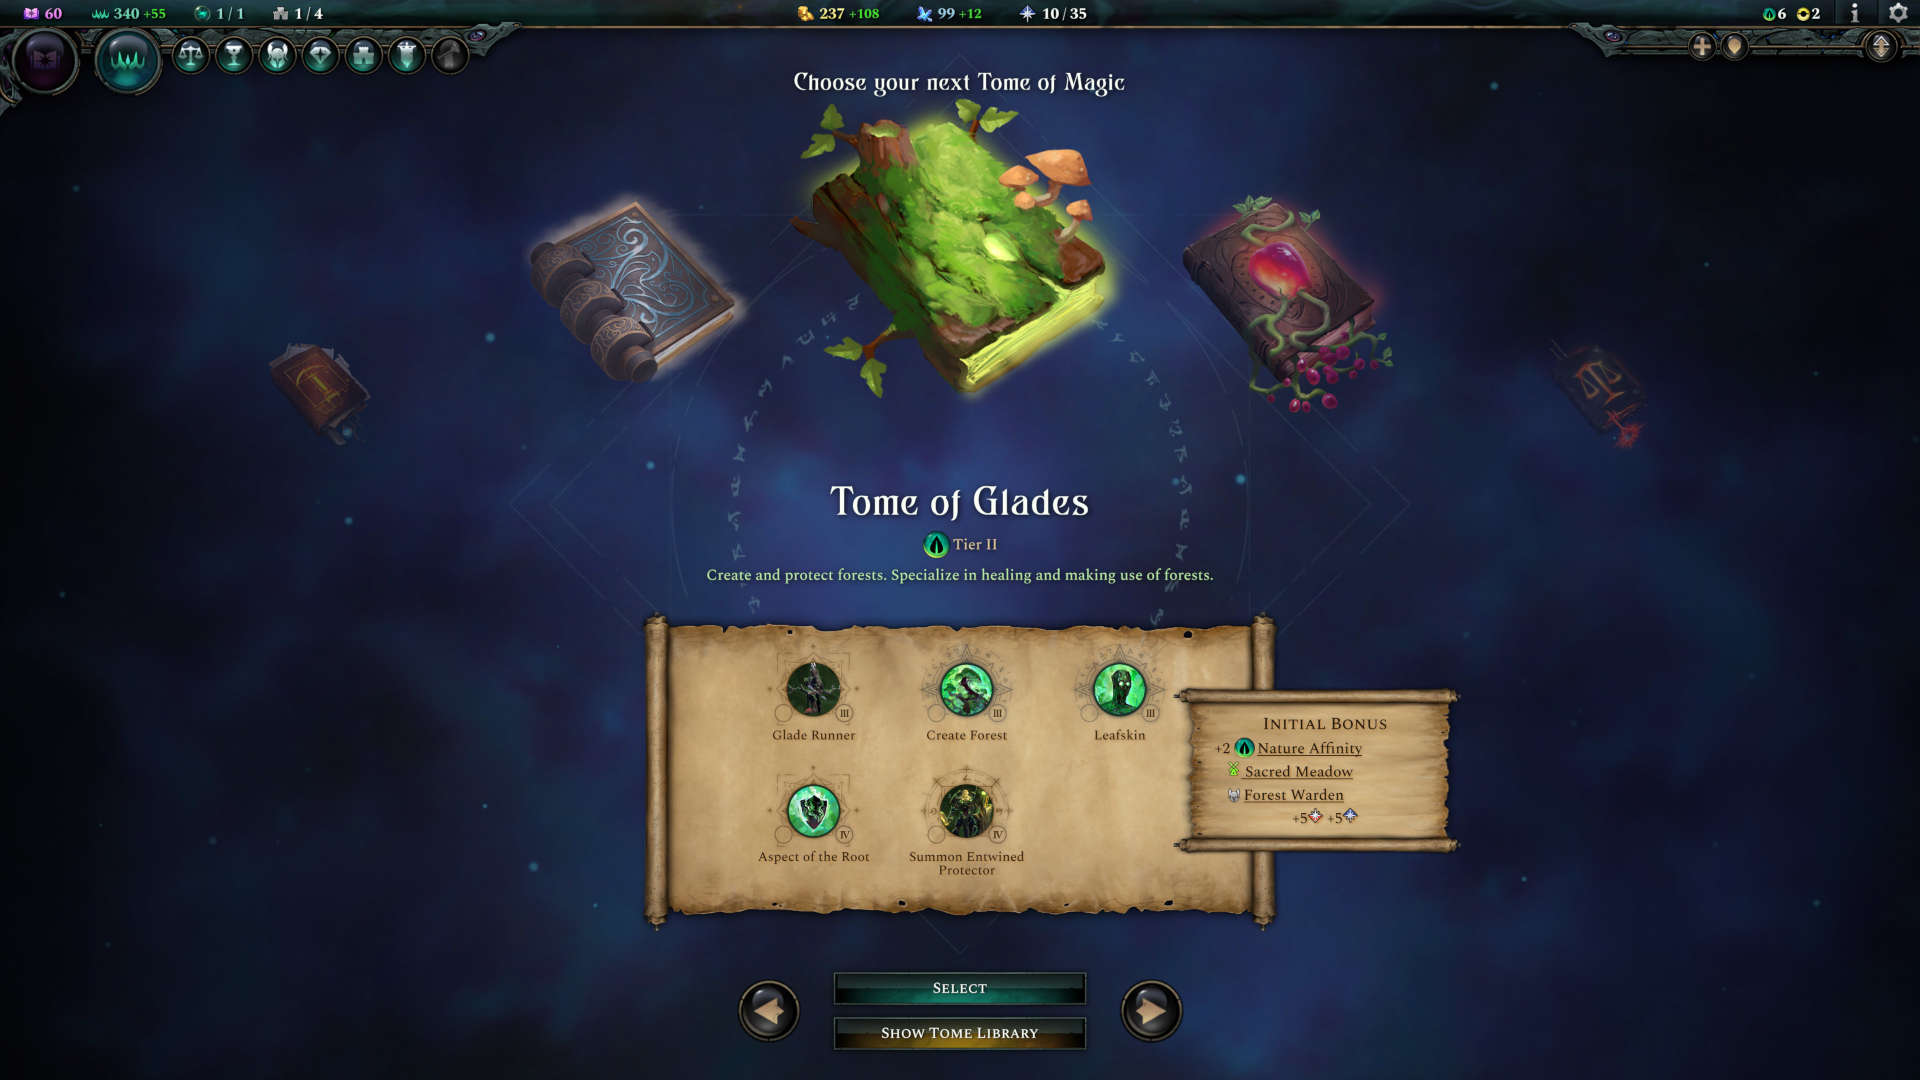 Age of Wonders 4 preview - selection screen for picking a tome of magic